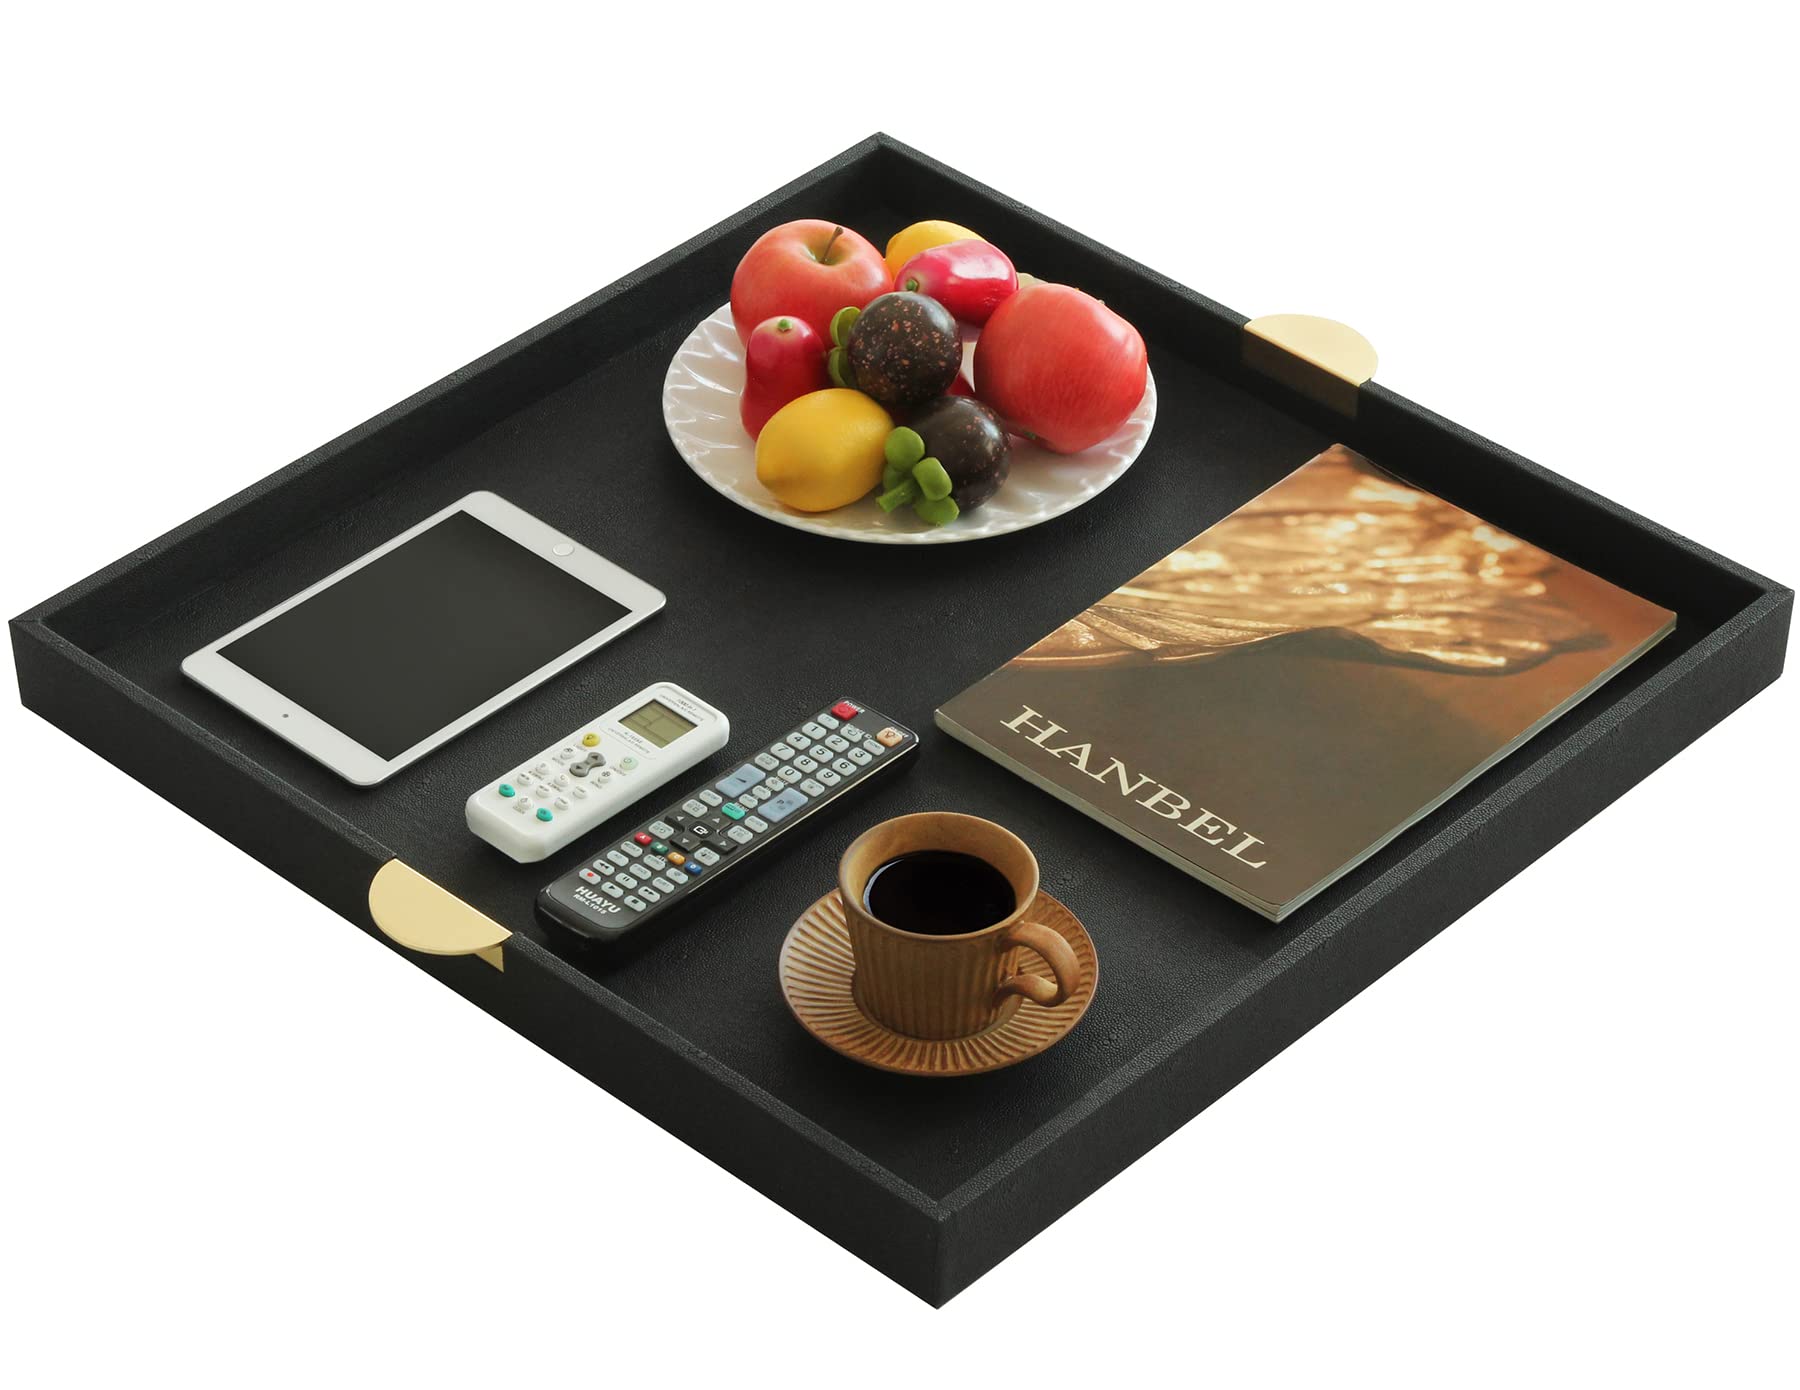 HofferRuffer Extra Large Square Serving Tray, Elegant Faux Leather Ottoman Tray with Gold Hardware Handles, Serve Tea, Coffee or Breakfast in Bed, 23.6 x 23.6 inches, Black Large Square Tray